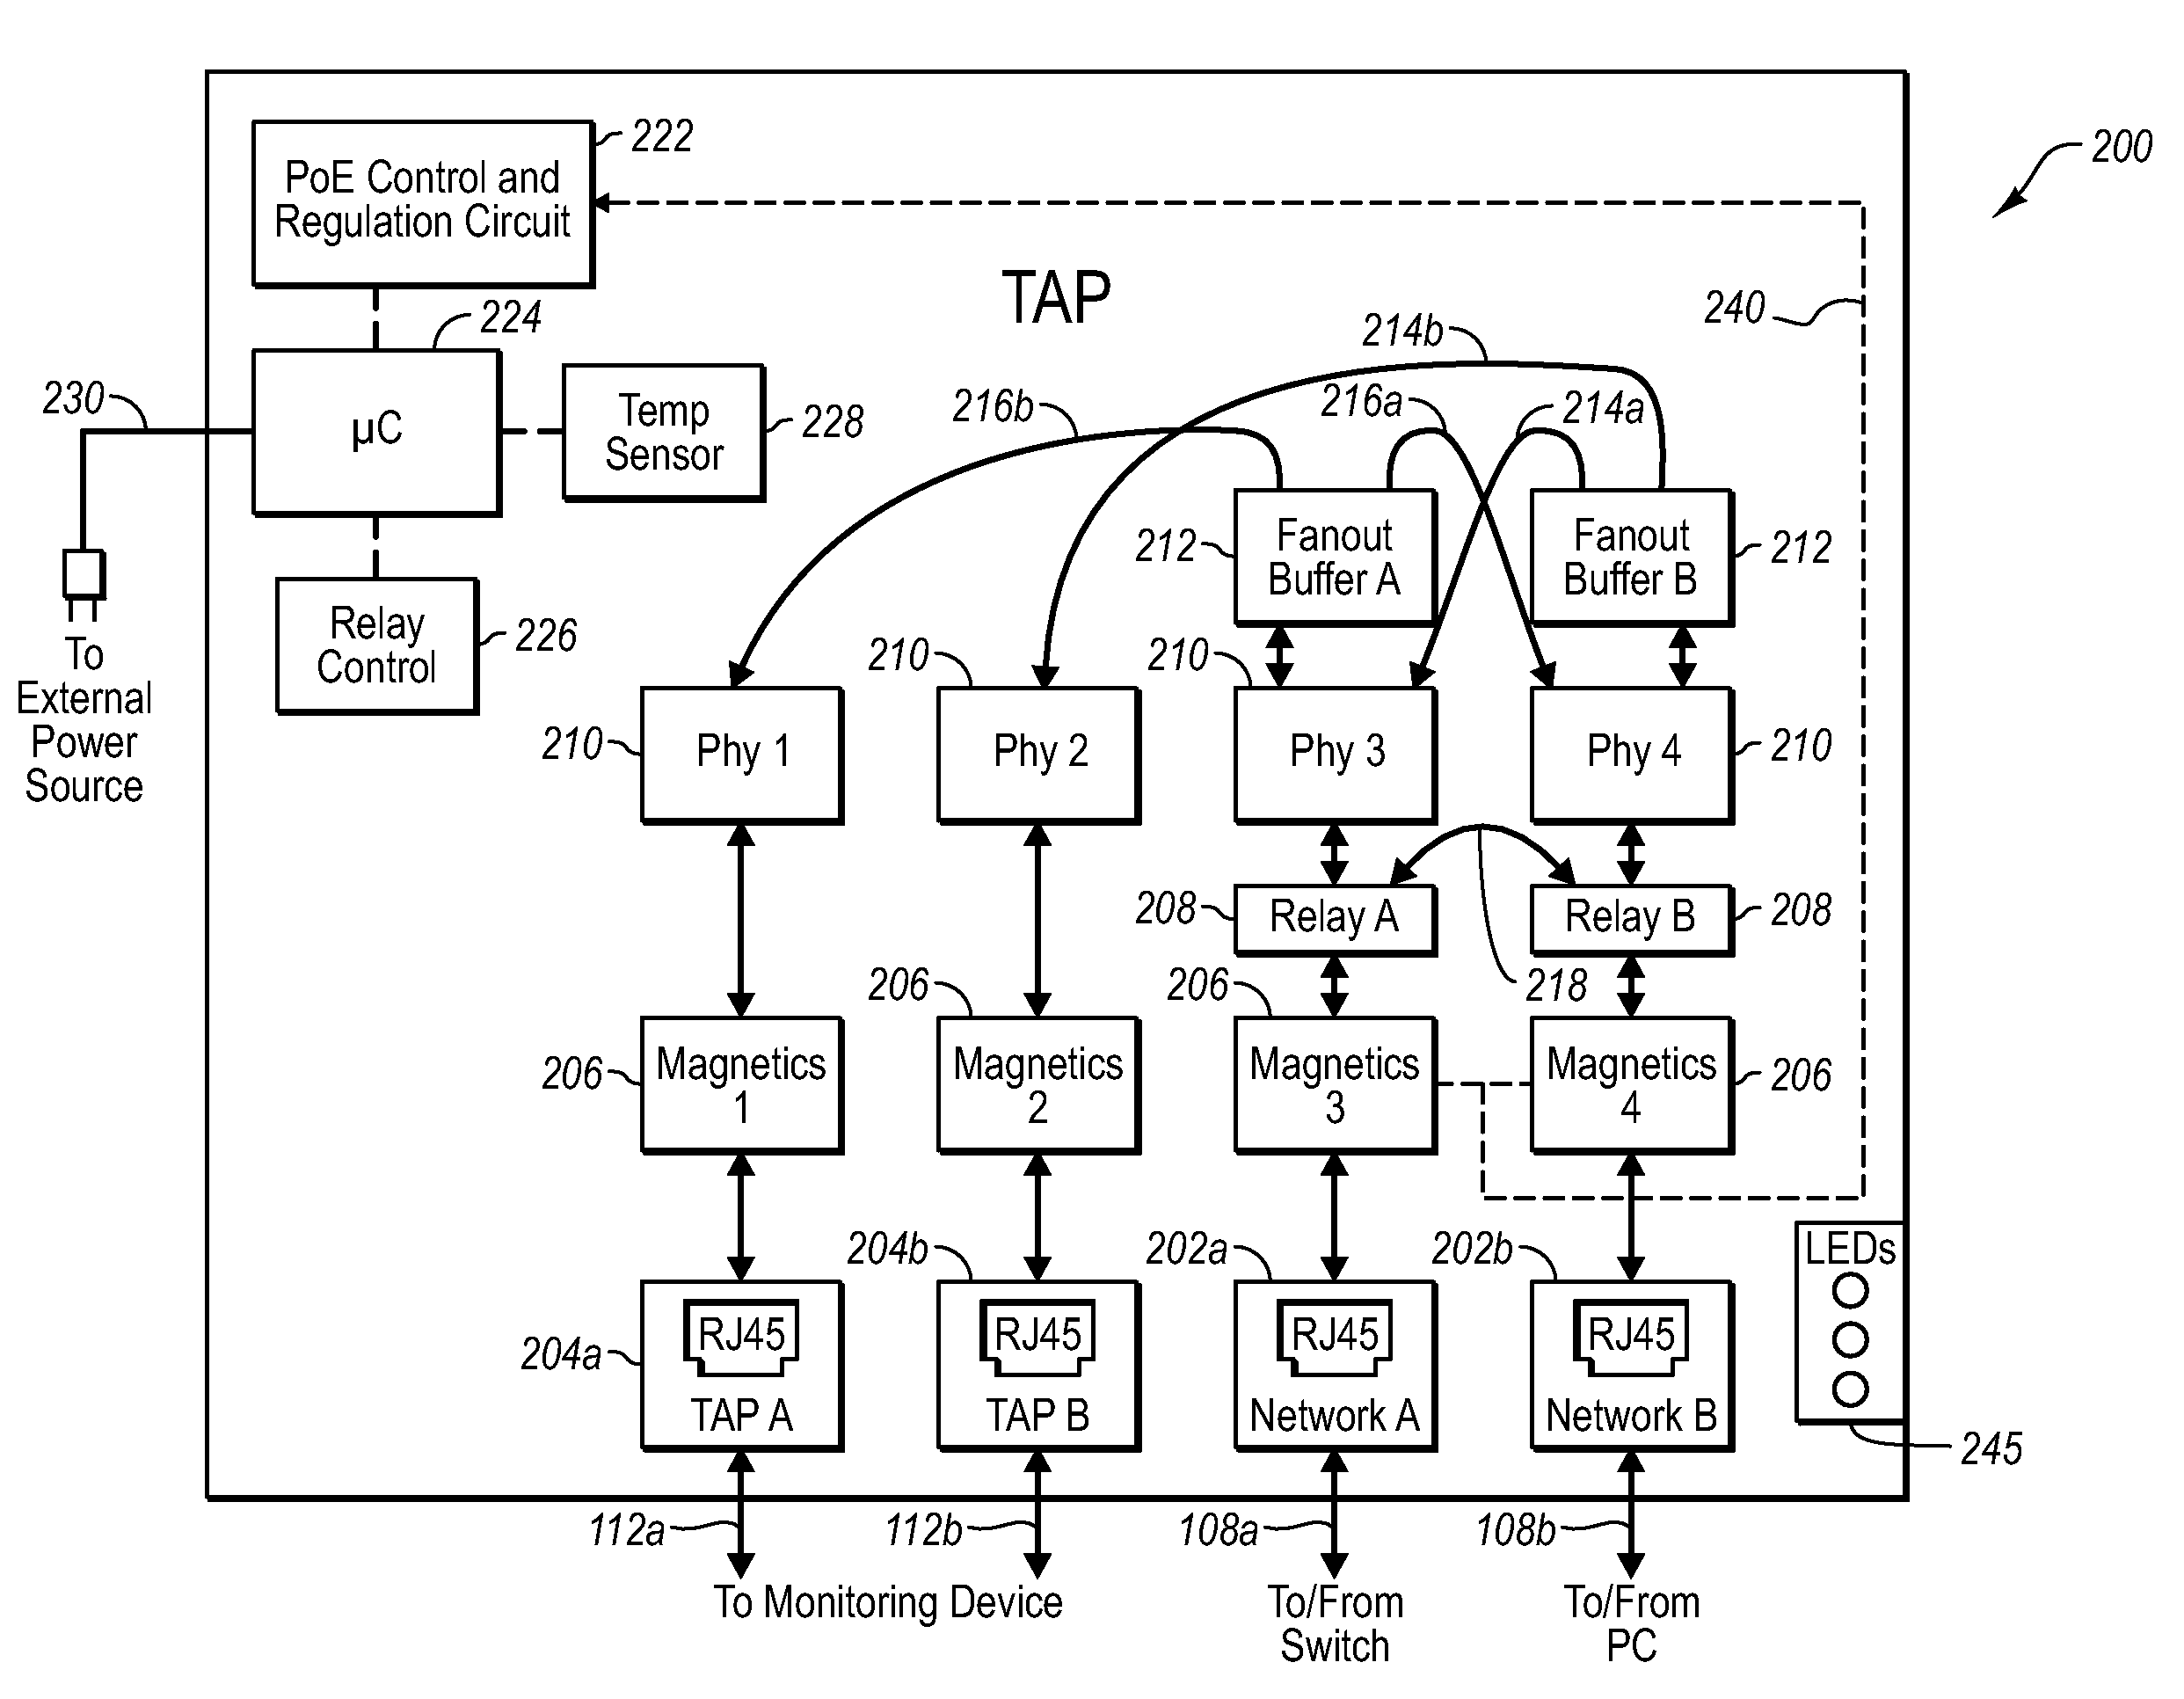 Network tap/aggregator configured for power over ethernet operation